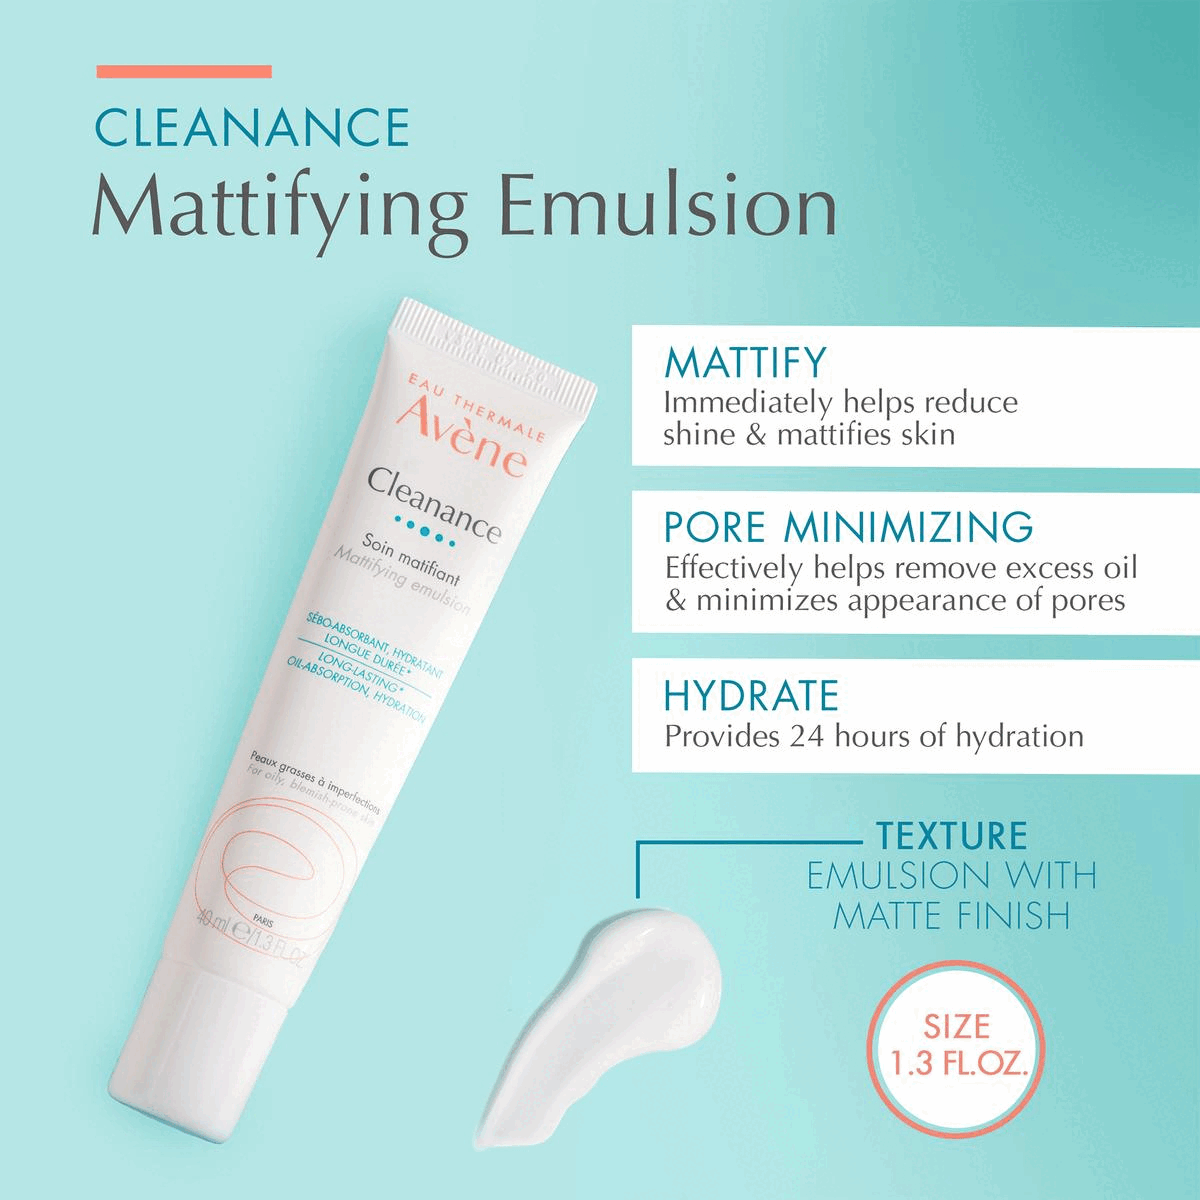 Image 1, cleanance mattifying emulsion, mattify immediately helps reduce shine and mattifies skin, pore minimizing effectively helps remove excess and minimizes appearance of pores, hydrate provides 24 hours of hydration Image 2, perfect for normal to oil combination skin, makes an ideal mattifying primer Image 3, Ingredients comedoclastin a powerful plant extract, helps reduce and limit the appearance of blemishes, mattifying powders help eliminate shine, avene thermal spring water clinically shown by 150+ studies to soothe, soften and calm skin, Image 4, how to use, apply twice daily for best results, can be used with medicated acne treatments, can be used after the cleanance cleansing gel